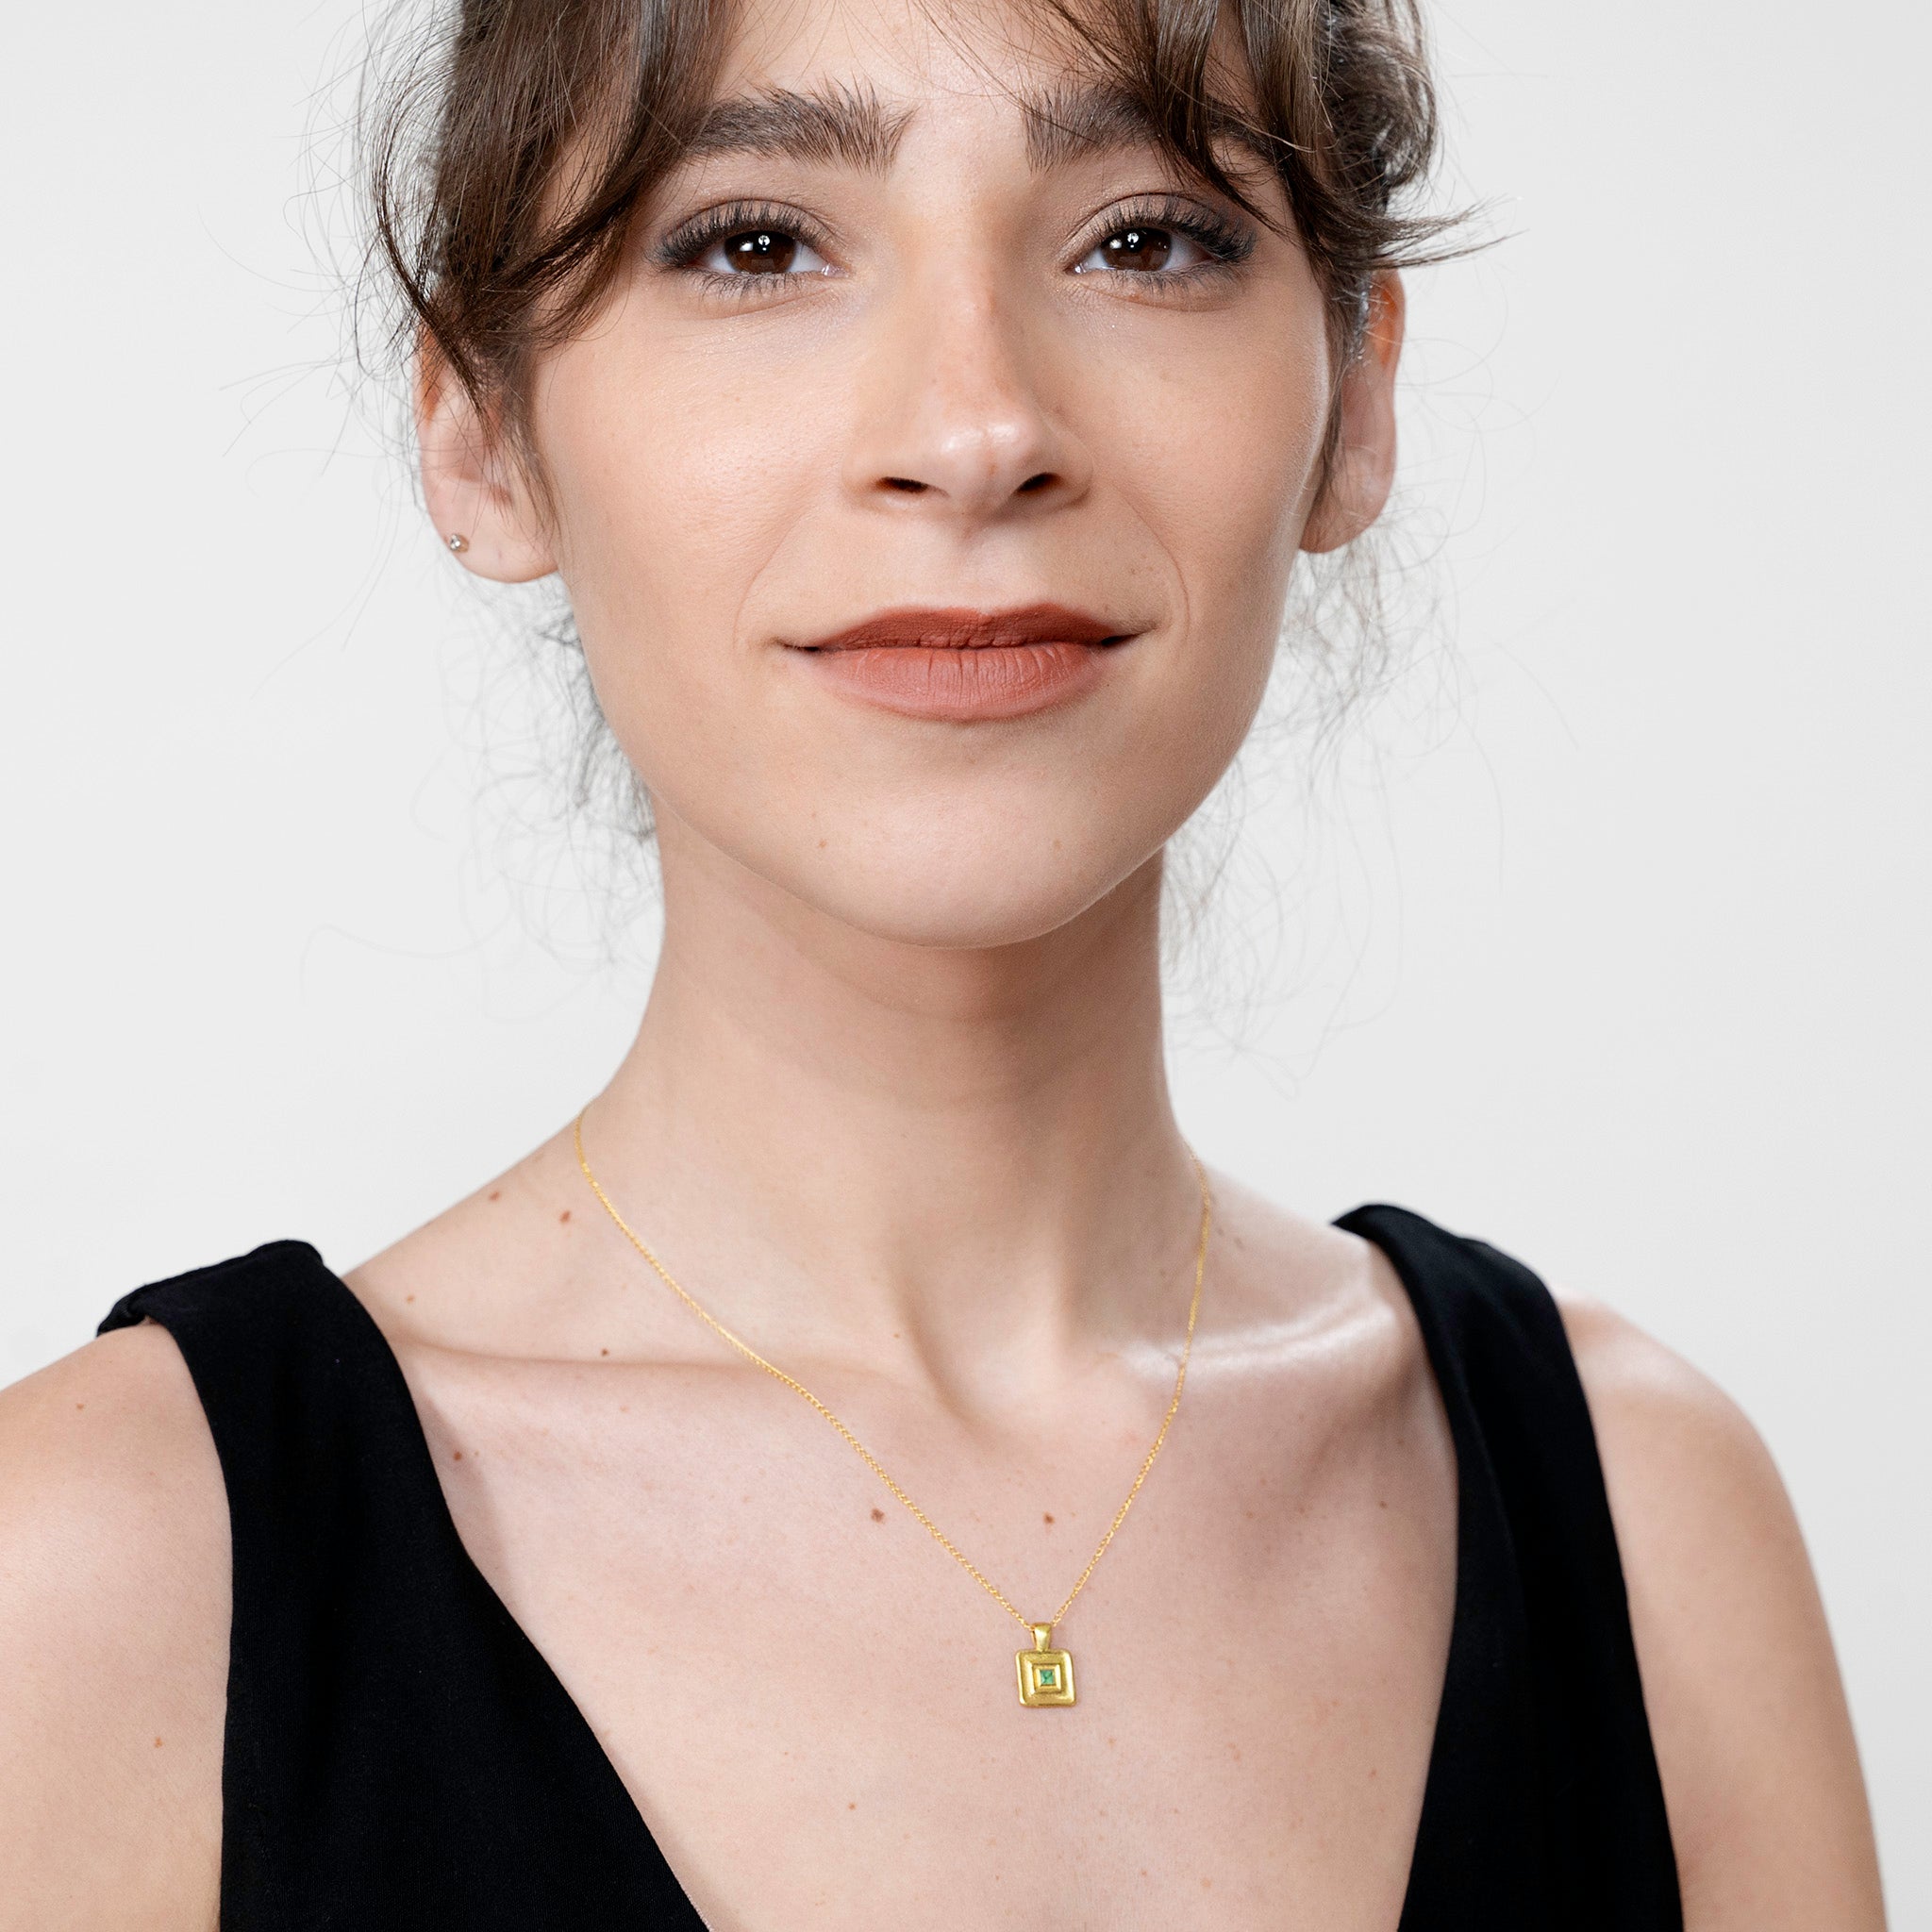 Model showcases the Pharaohs II handmade square gold pendant, centered with a square Emerald gemstone, a piece inspired by the regal adornments of Egypt's ancient rulers.